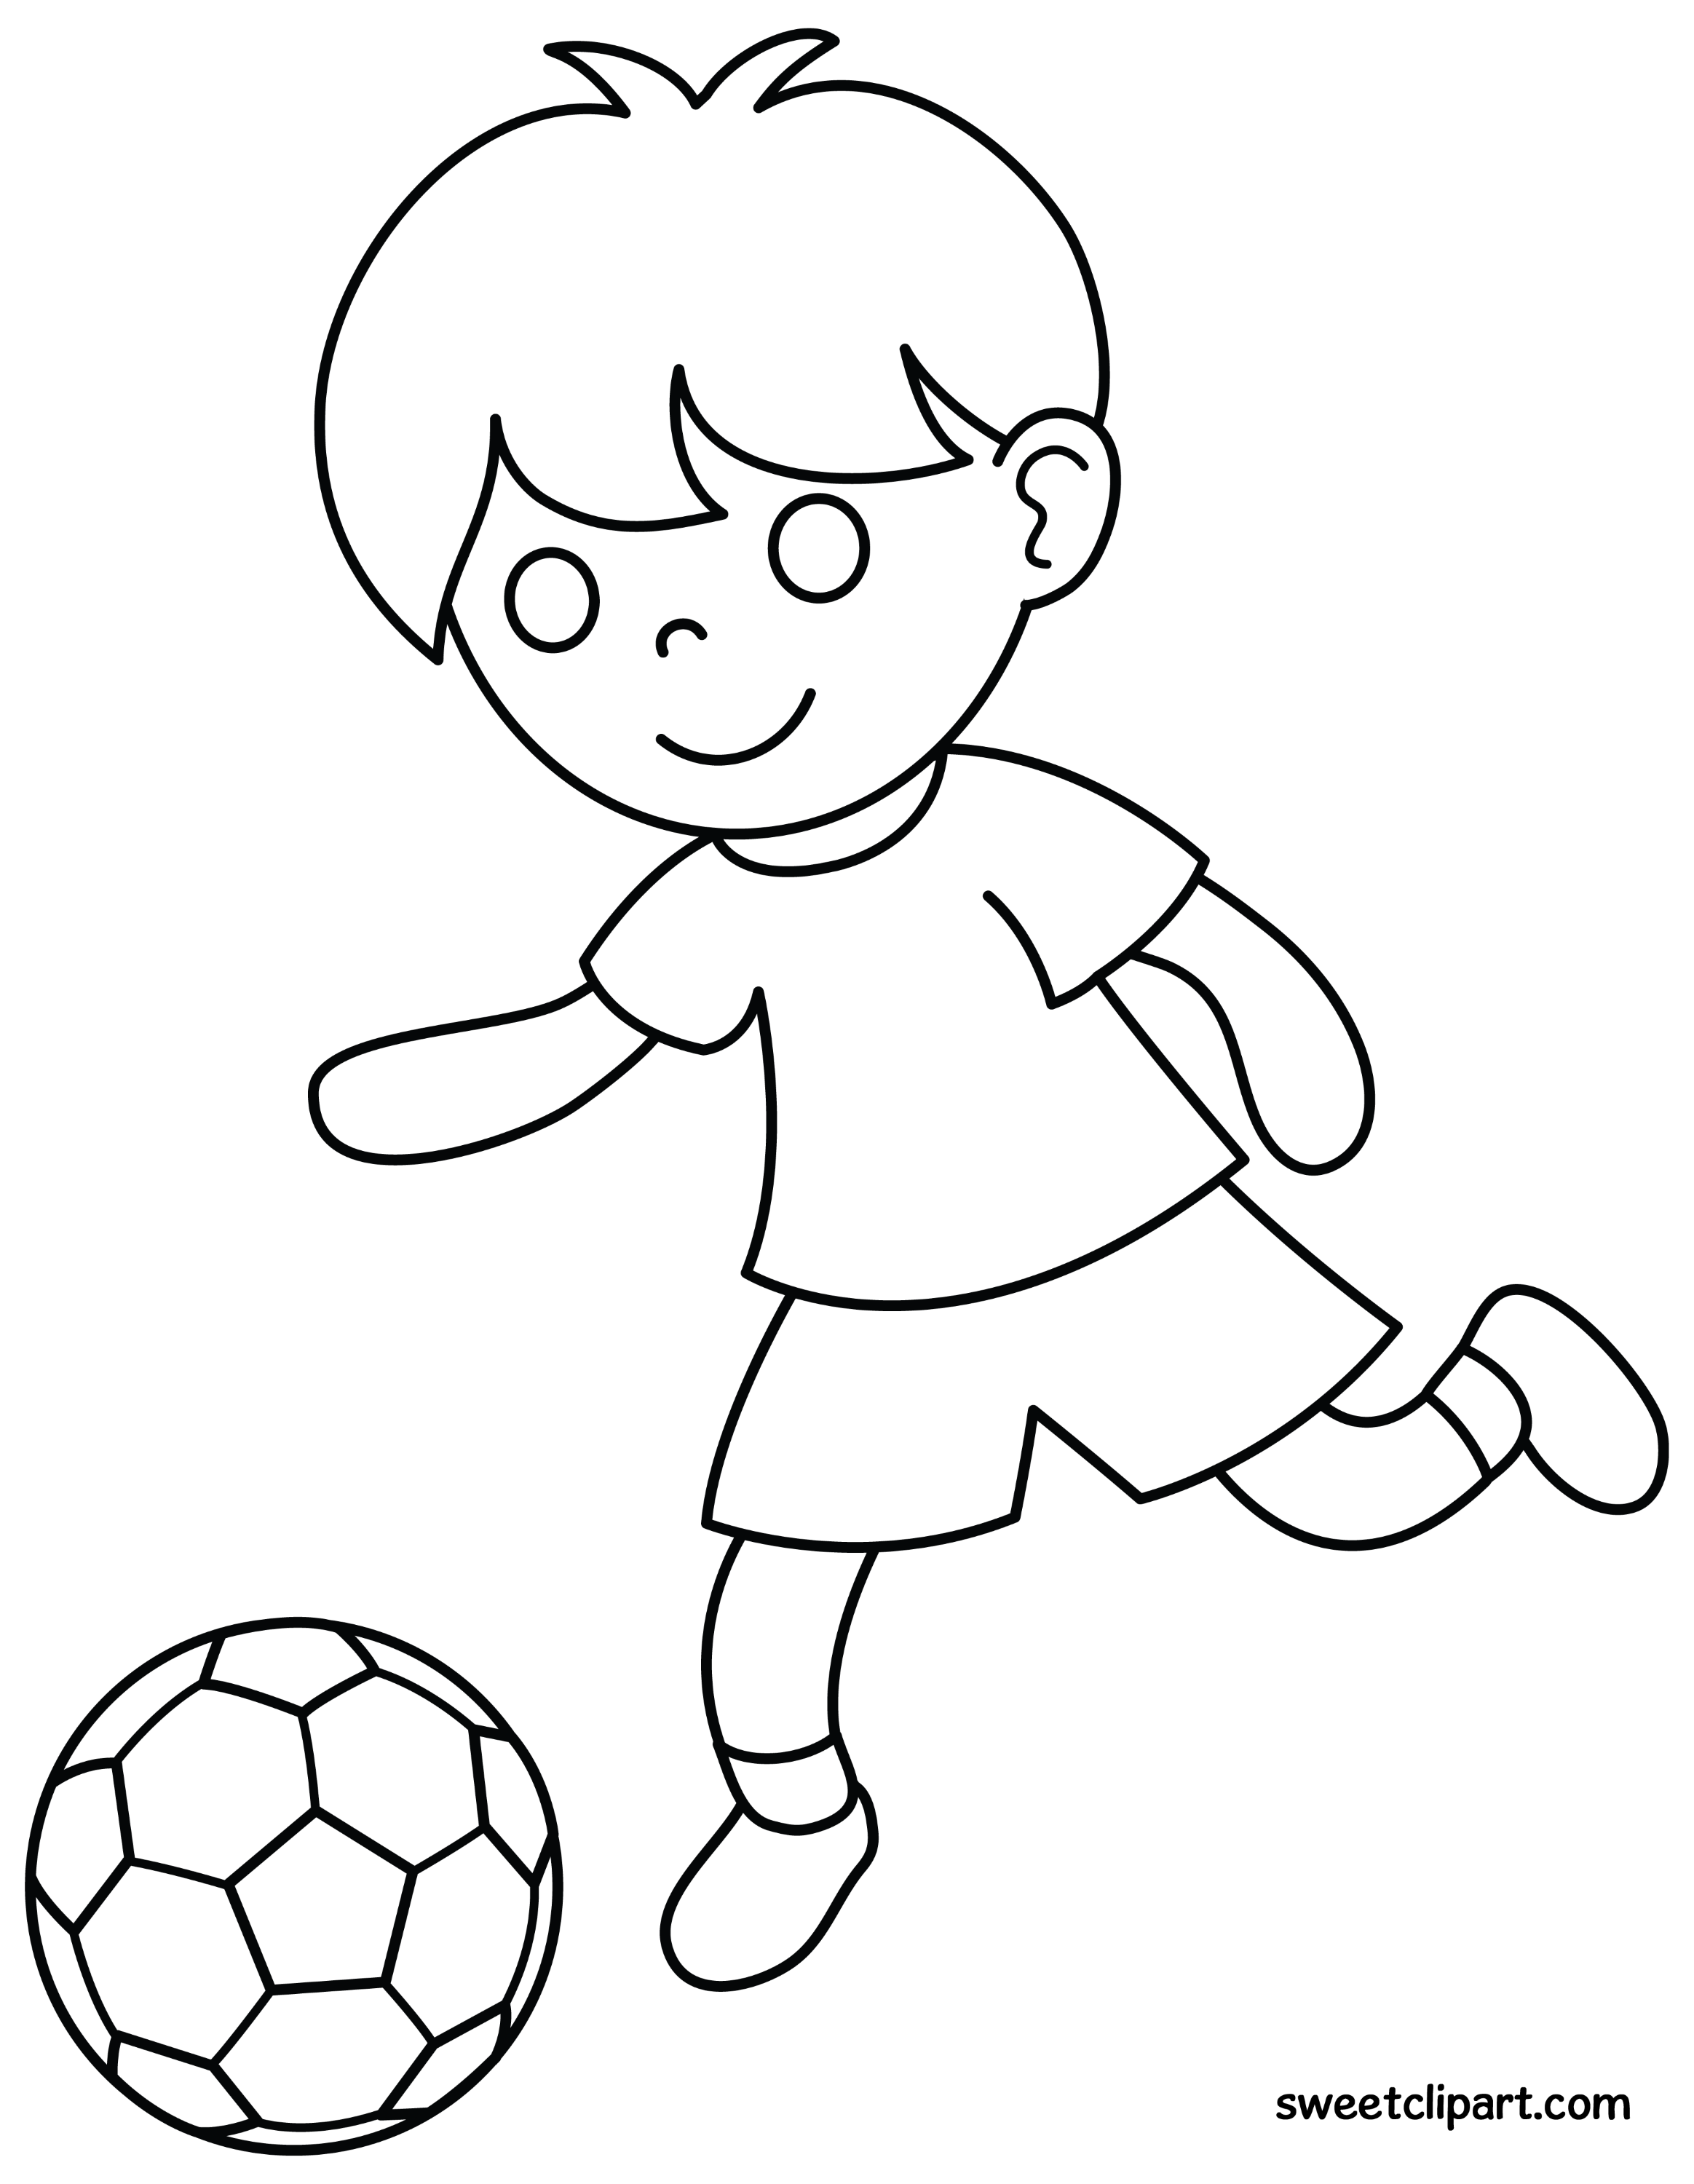 Soccer Coloring Sheets Free Coloring Sheet Clipart Best Clipart Best ...